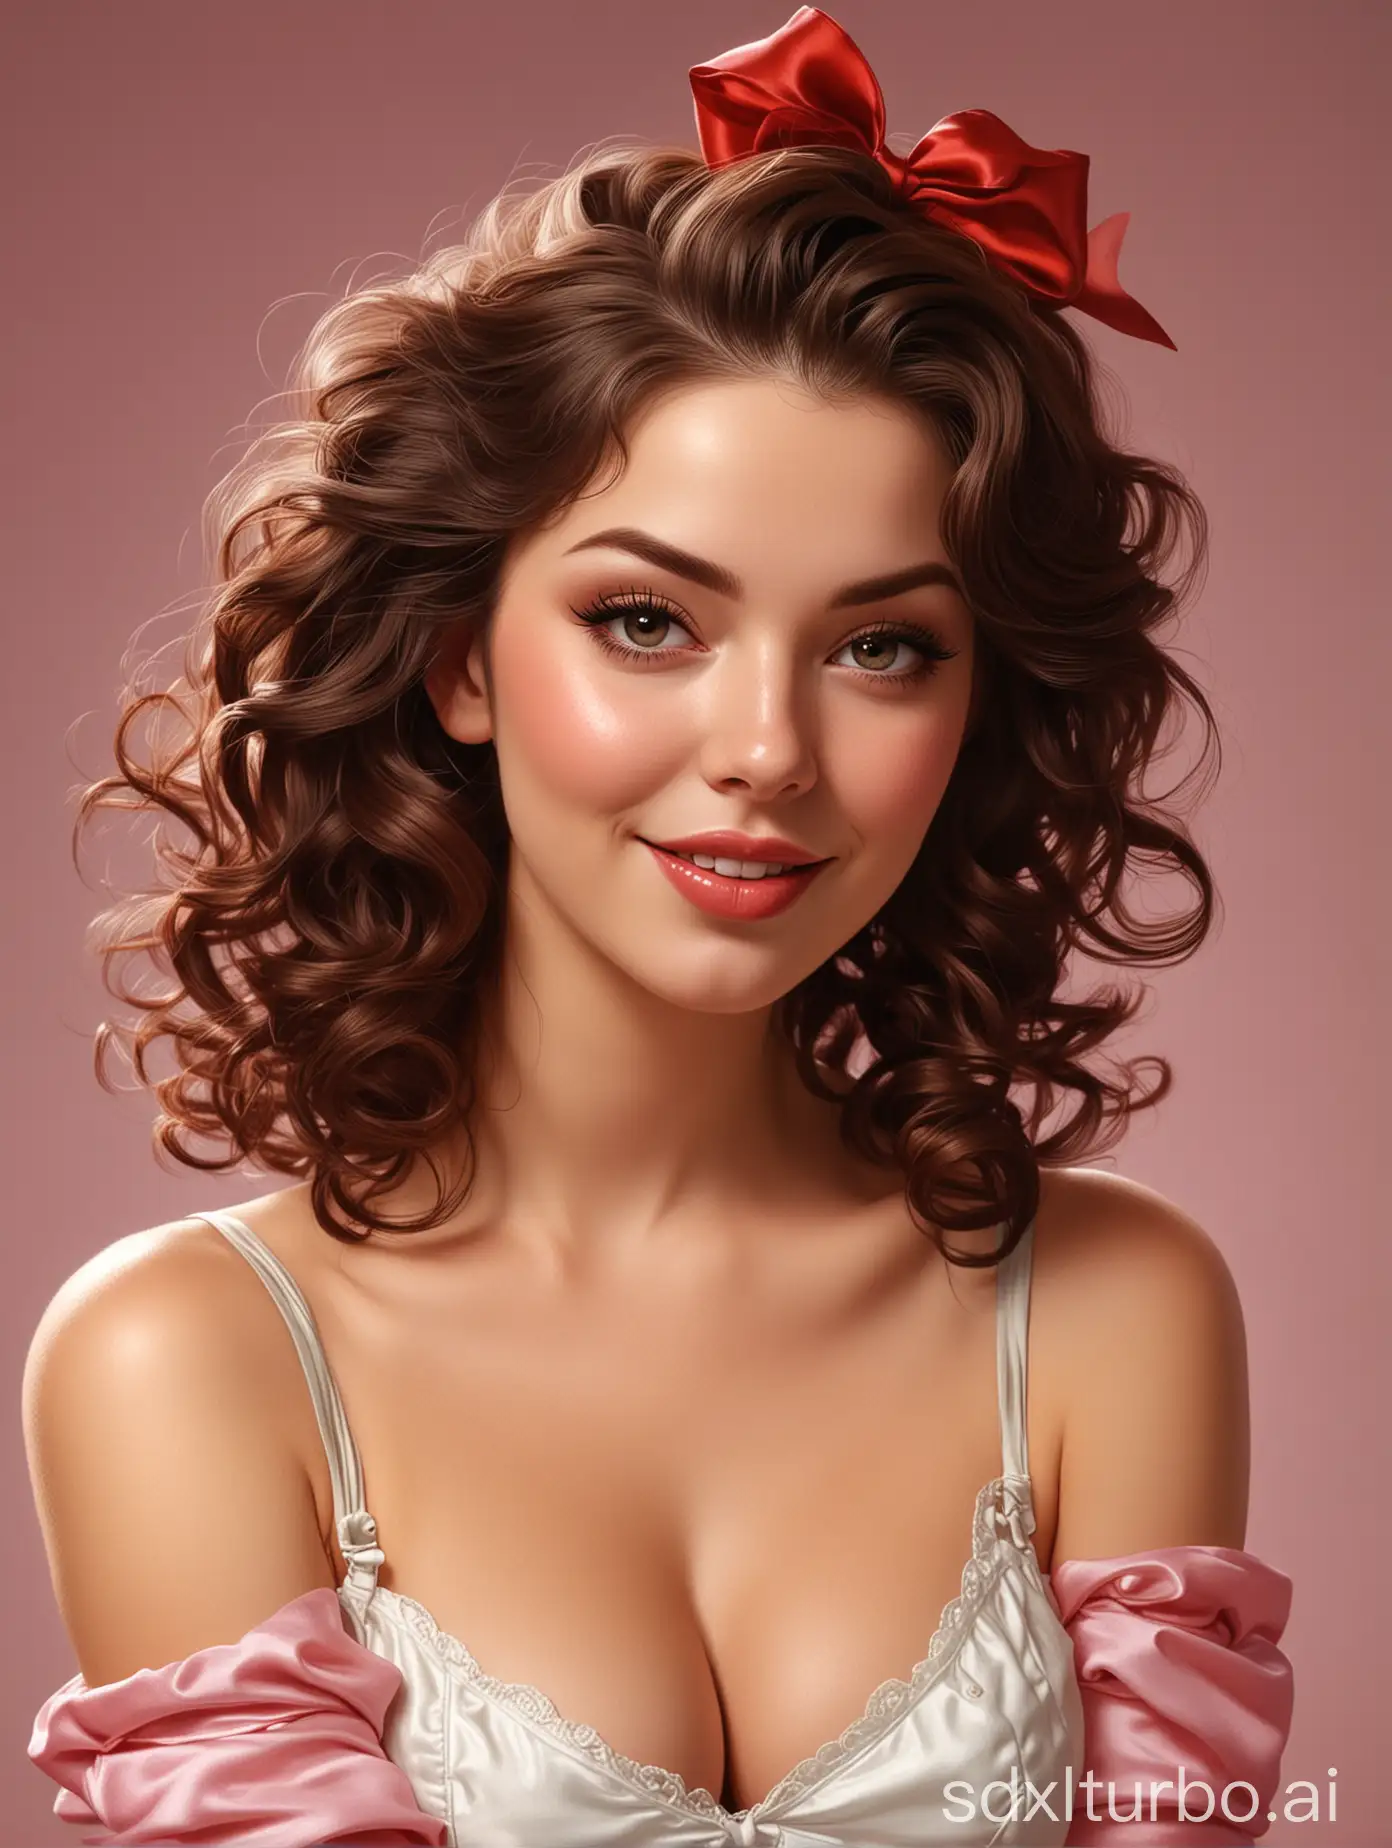 a woman sitting legs wide open, masuimi max, submissive, curly blond, photorealiste,  wicked, often described as flame-like, curvaceous. detailed expression, broomstick, porcelain white face, dominant, girl pinup, curls on top, red blush, chest and face, pinup style, in rapture, deep dimples, on a young beautiful woman neck, silky garment, girl in love, daisies, dominant pose, cheerful, a big smile on her face, glamorous hairstyle, very photorealistic, behance favourite, defined cheek bones, lady, natural contour aesthetics!!, perfect face!!, curls on top, high resolution:: gil elvgren, head and shoulders shot, shoulder-length brown hair, very extremely beautiful, dating app icon,  coiffed brown hair, kinkade. award winning, gorgeous digital painting, sexy hot body, inspired by Alberto Vargas, looks like young liv tyler, raspberry, an oil painting of a kitten, rosette, crimson tide, by Thomas Doughty, sarah, dark pin-up style hair, evokes delight, rosette, red hot, knees, bow, eyecandy, seams, realistic cute girl painting, dark pin-up style hair, awarded on cgsociety, with curls, ultrarealistic sweet bunny girl, girl in studio, drawn in the style of mark arian, ( waitress ) girl, 5 0 s, bodypainting,a picture by Zofia Stryjenska